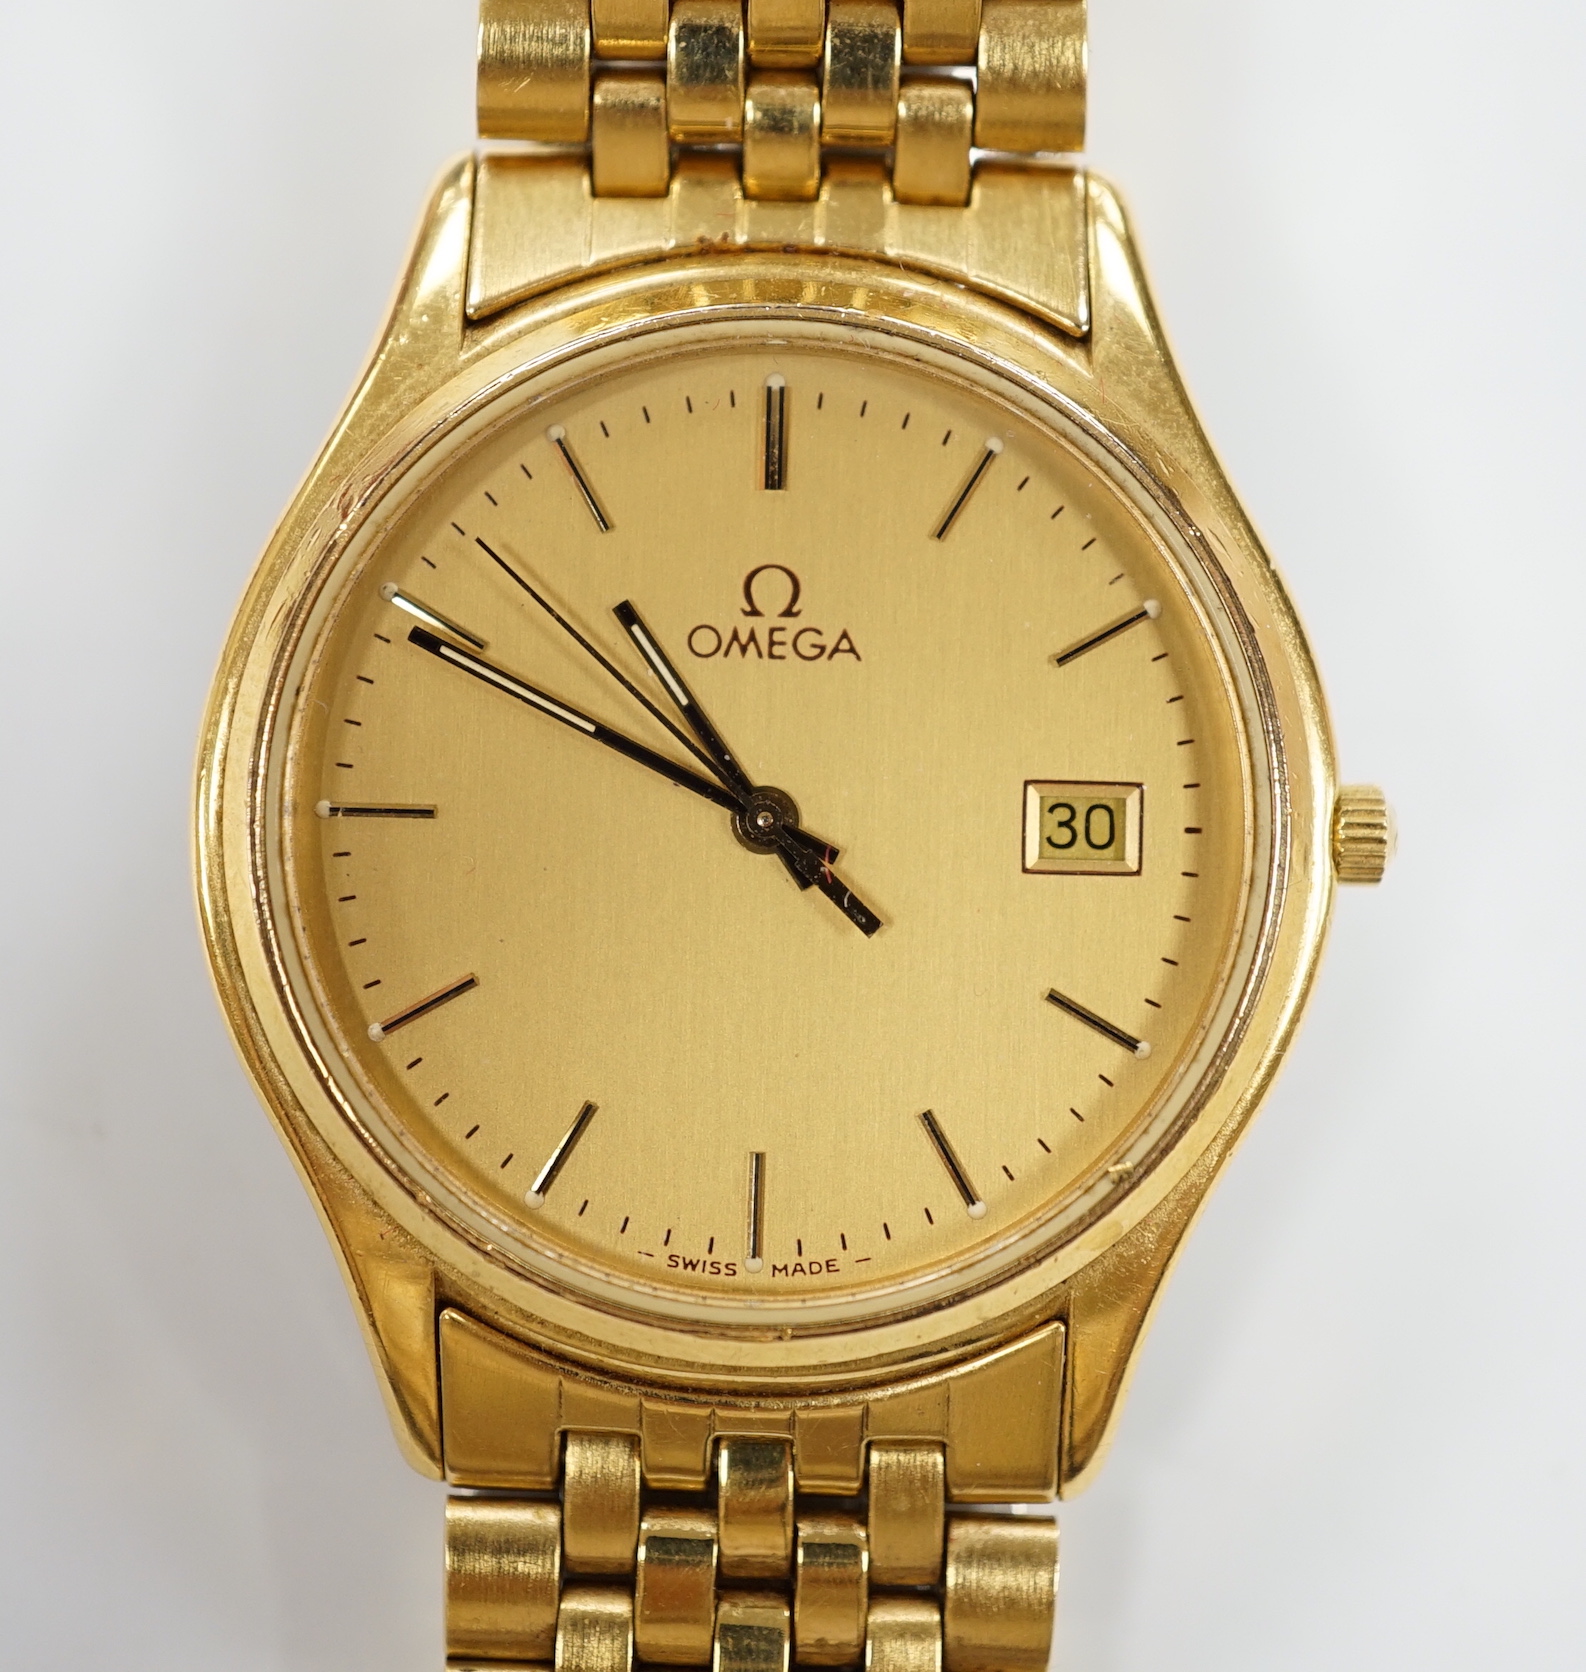 A gentleman’s steel and gold plated Omega Seamaster quartz wristwatch, with box or papers.